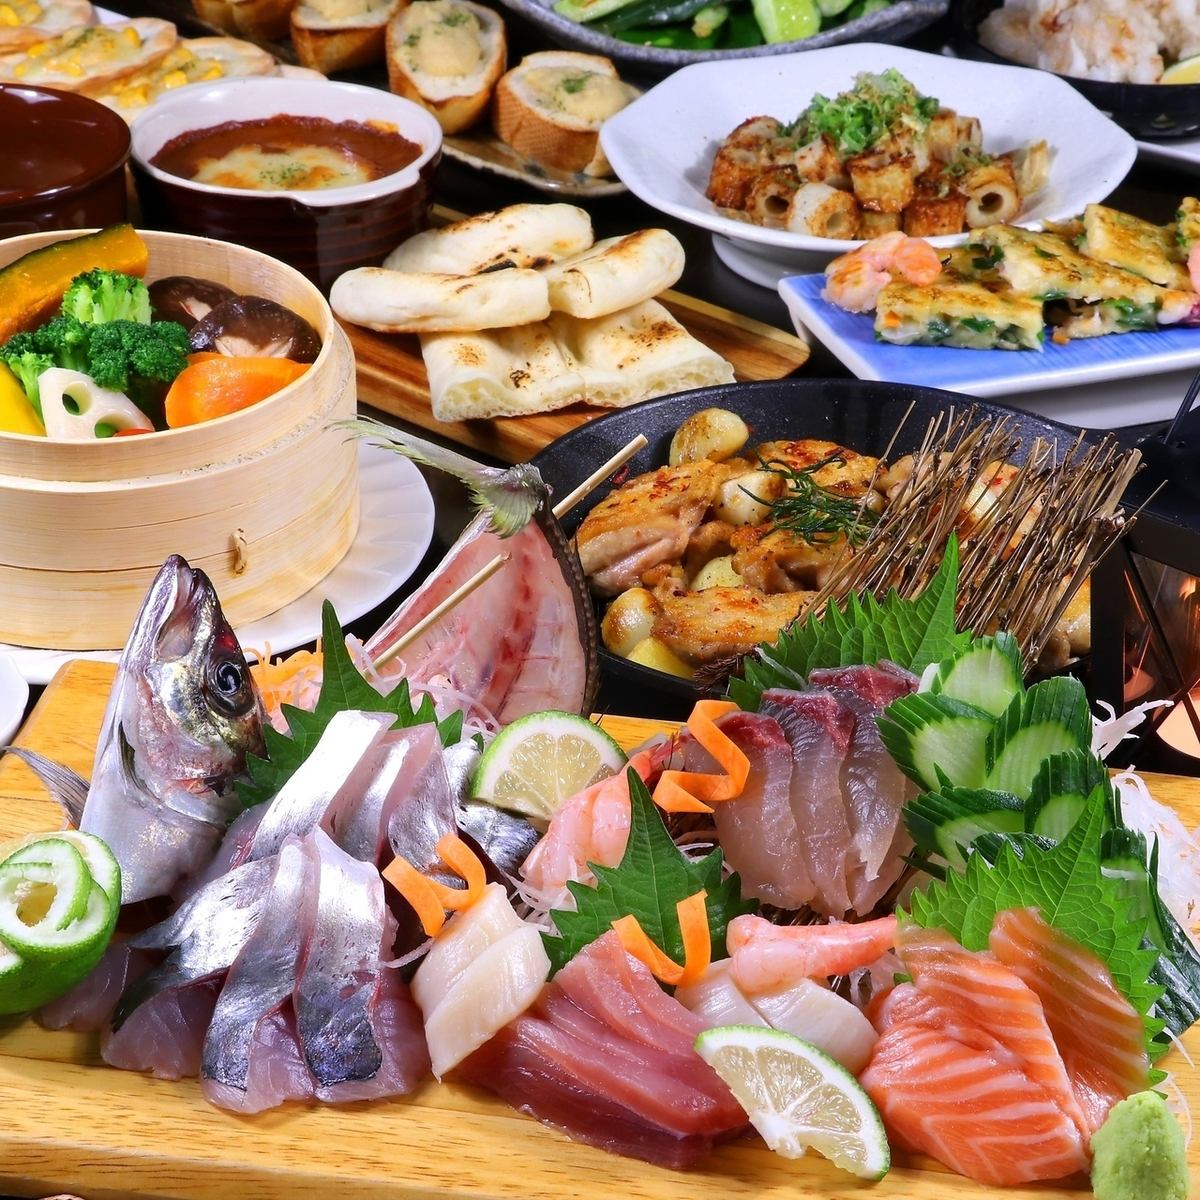 Recommended for welcome and farewell parties ♪ We have many courses with a luxurious sashimi platter